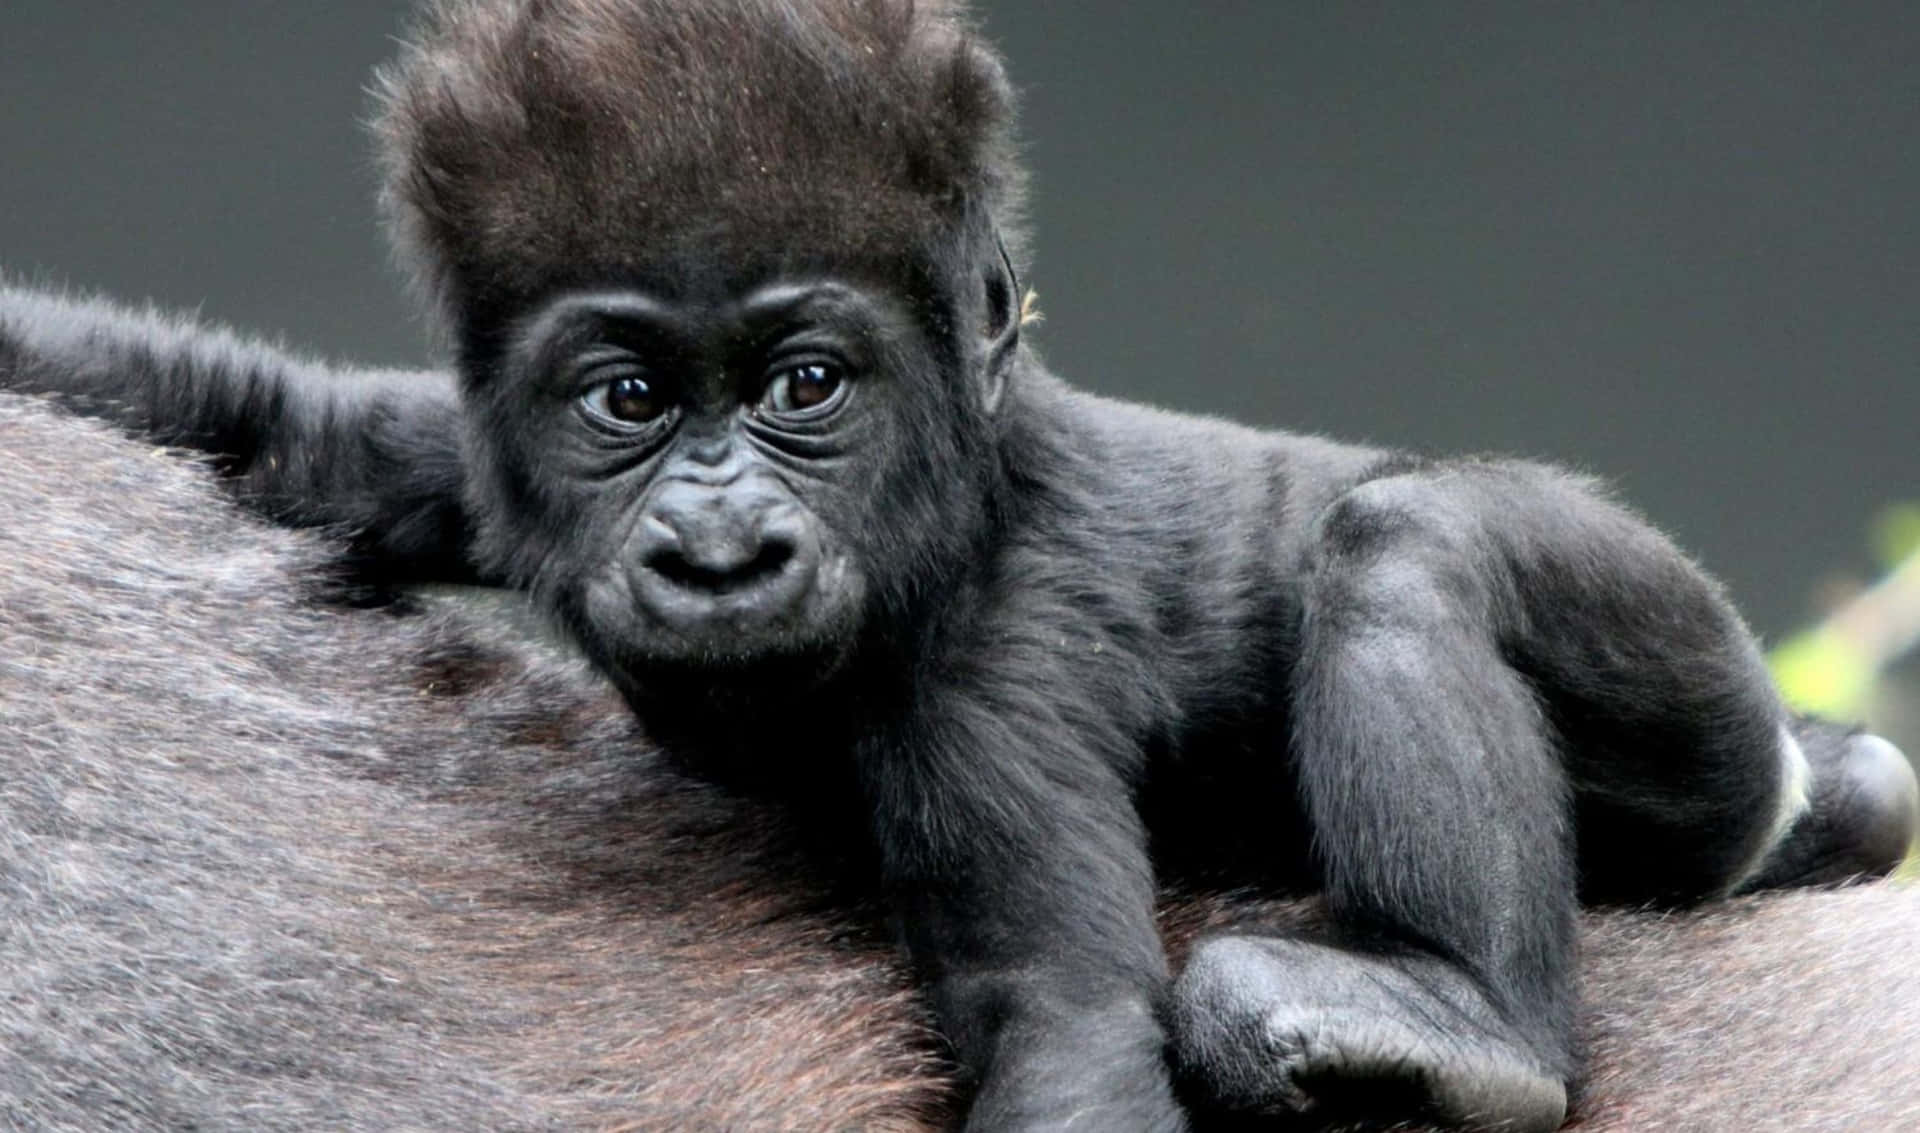 A Baby Gorilla Is Sitting On The Back Of A Large Animal